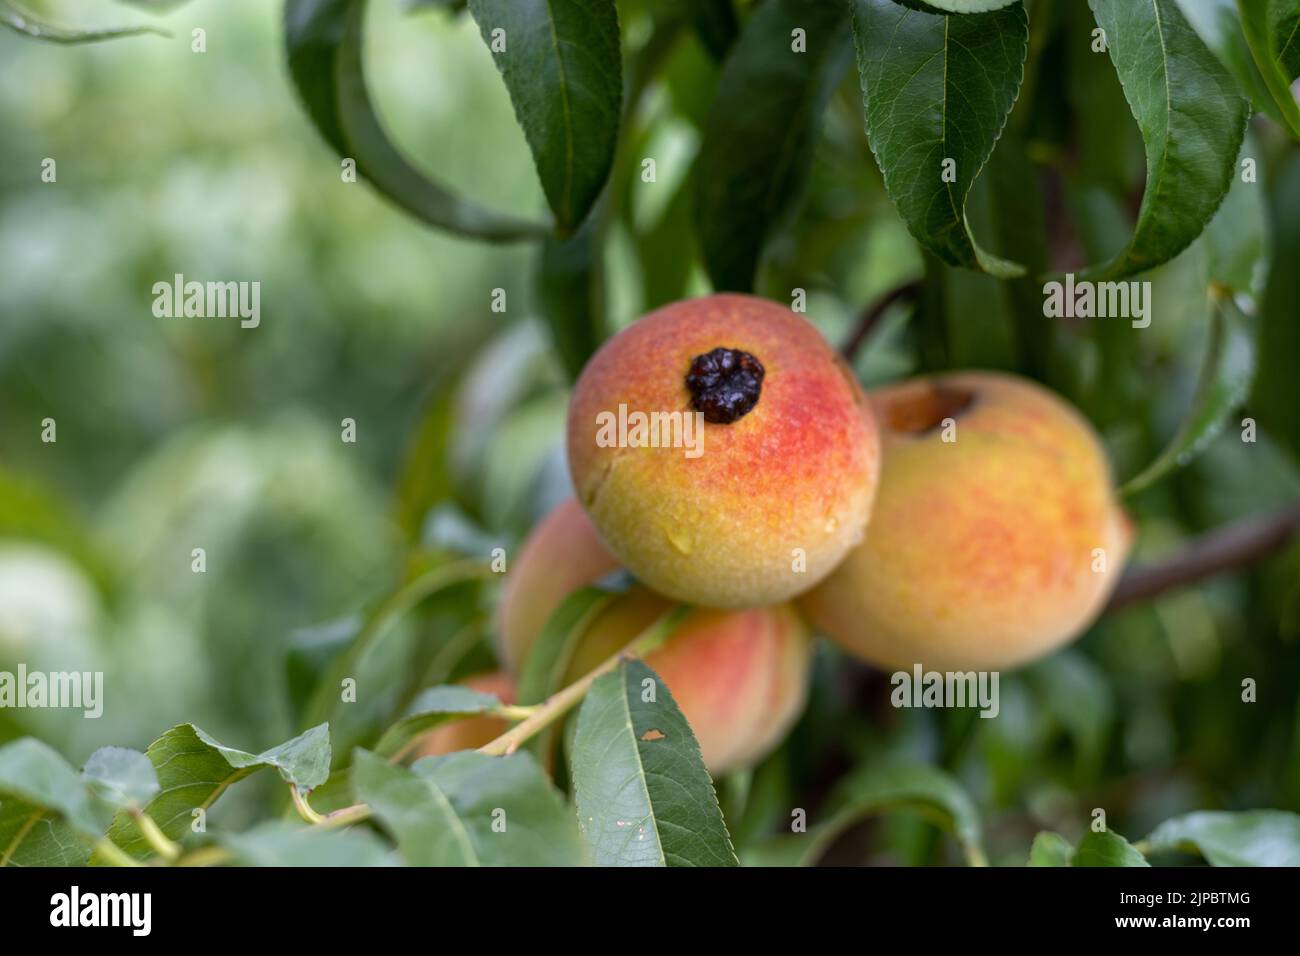 Closeup view of a infected peach fruit on a tree with selective focus Stock Photo